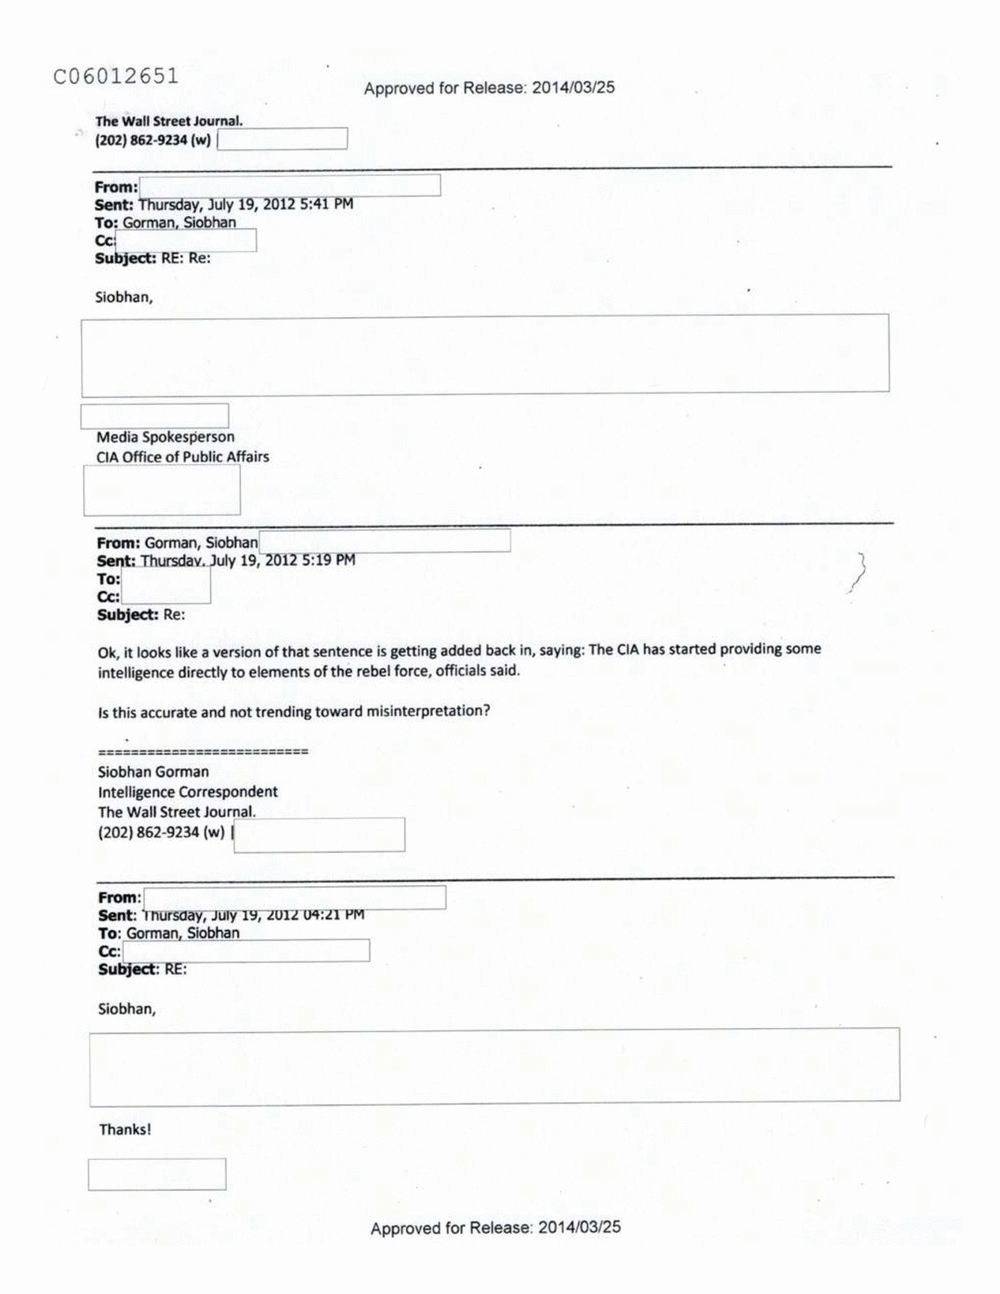 Page 226 from Email Correspondence Between Reporters and CIA Flacks